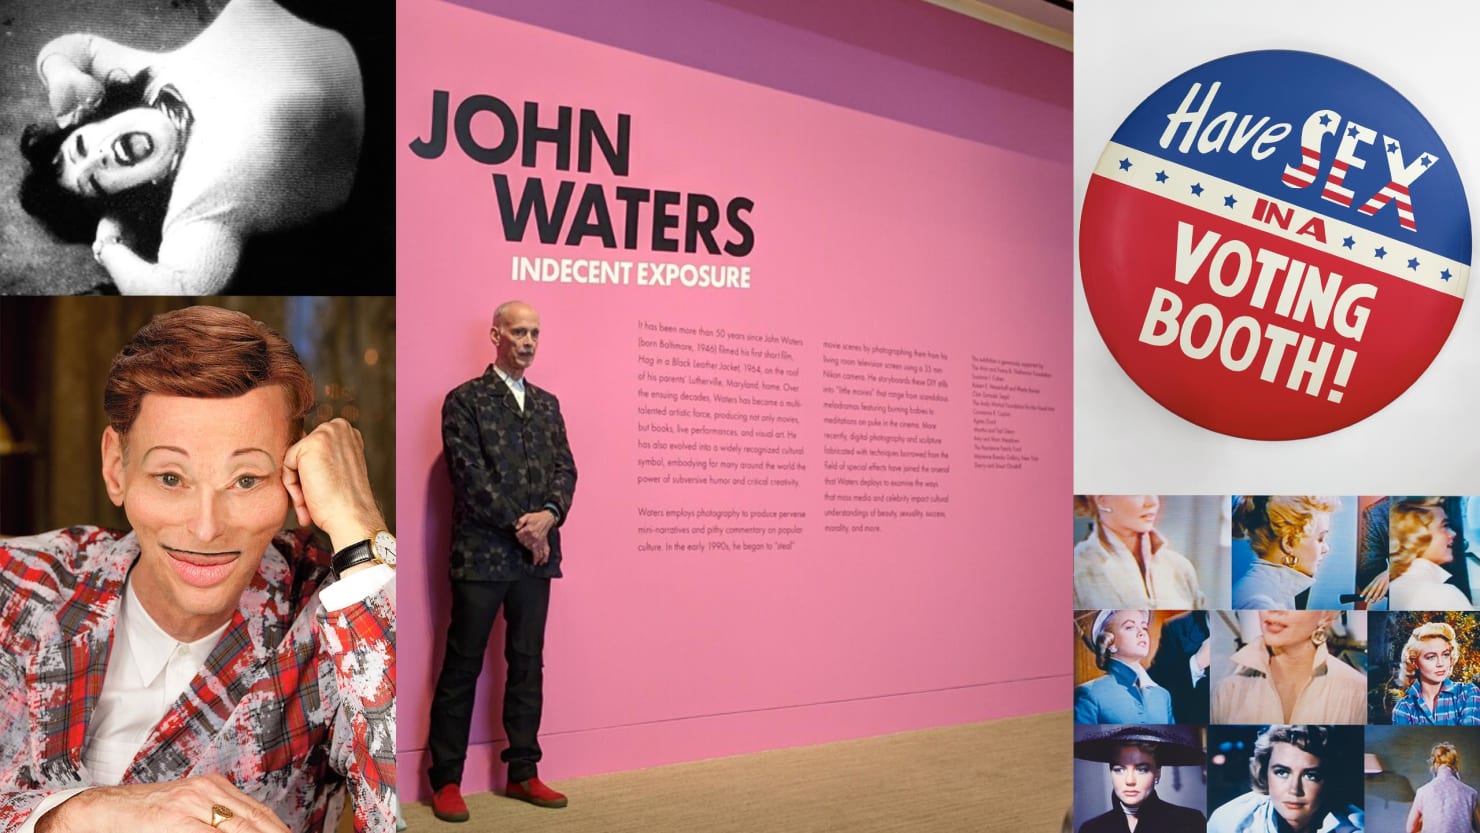 John Waters Takes Us on a Funny Filthy Tour of His Fine Art